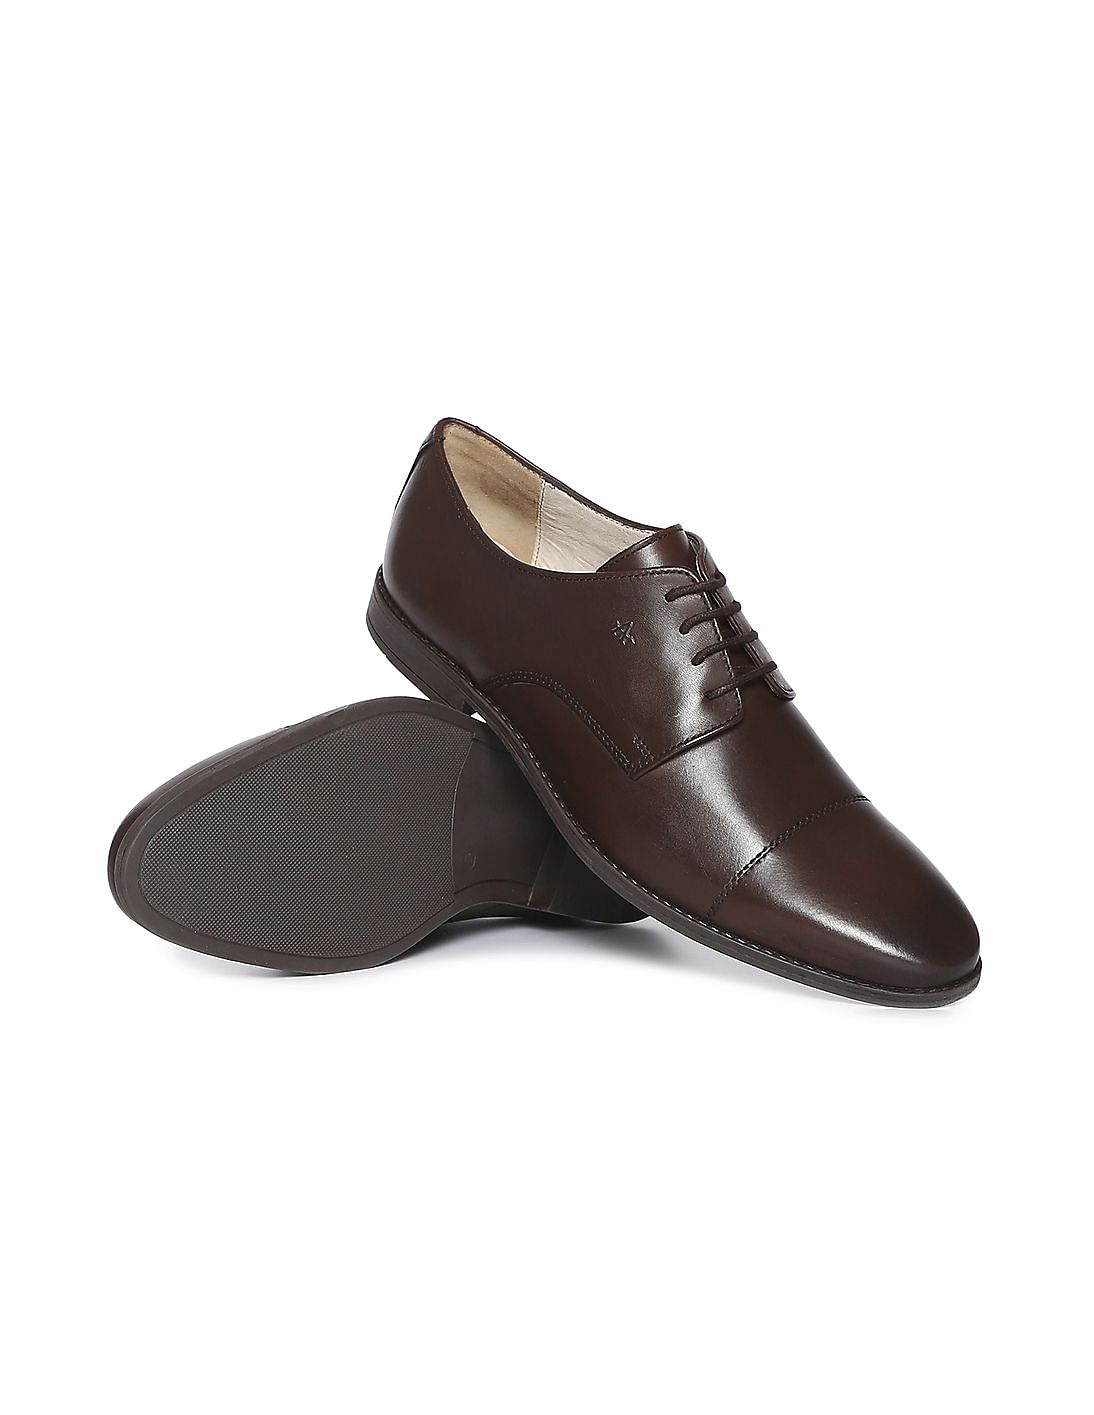 Buy MenCap Toe Leather Derby Shoes online at NNNOW.com